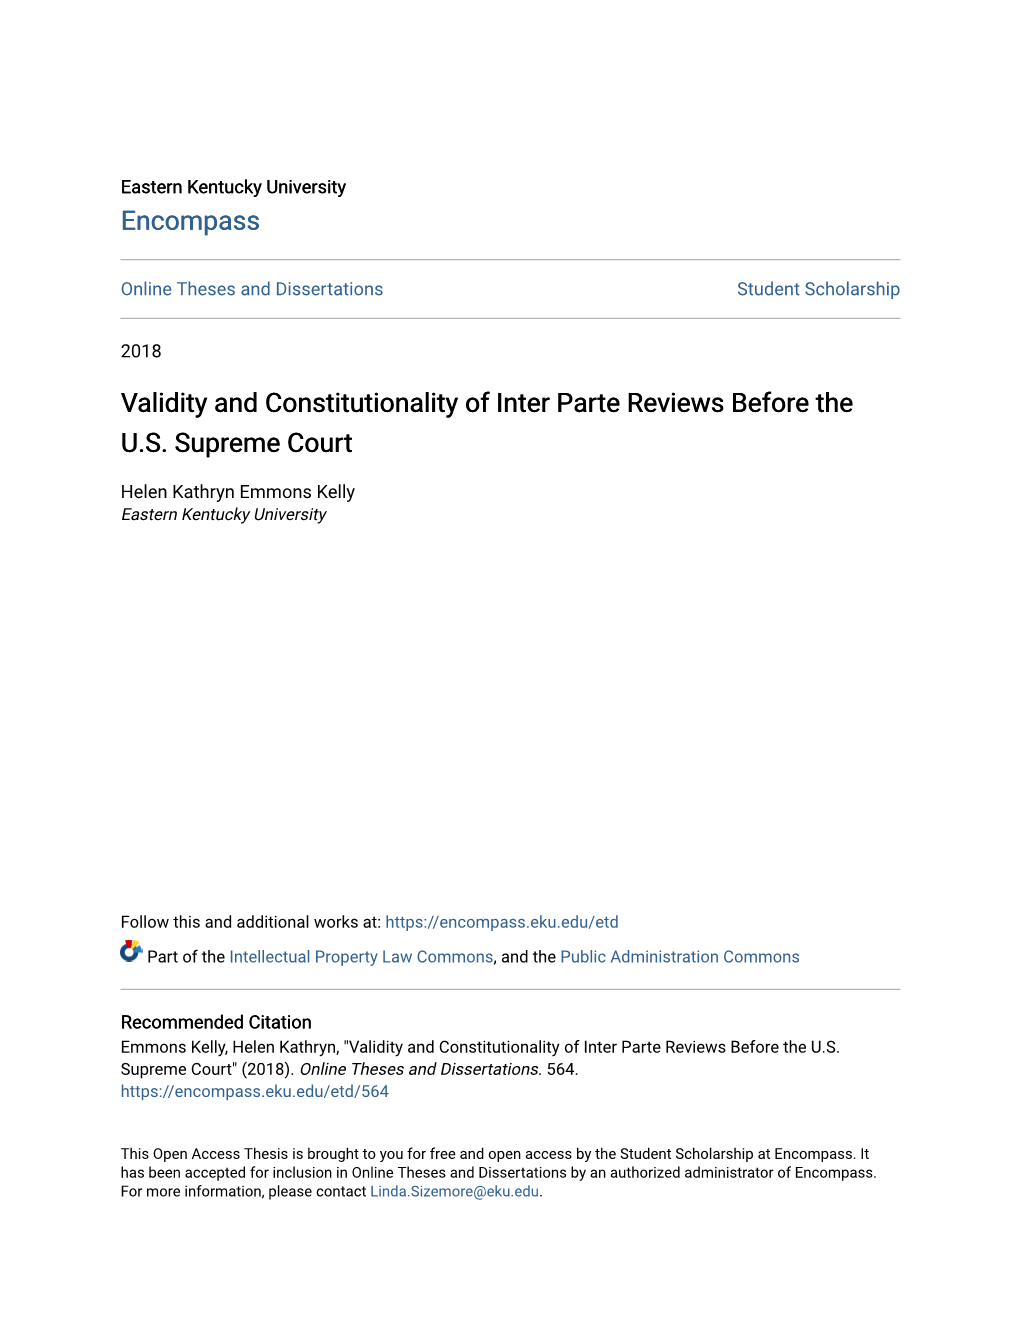 Validity and Constitutionality of Inter Parte Reviews Before the U.S. Supreme Court